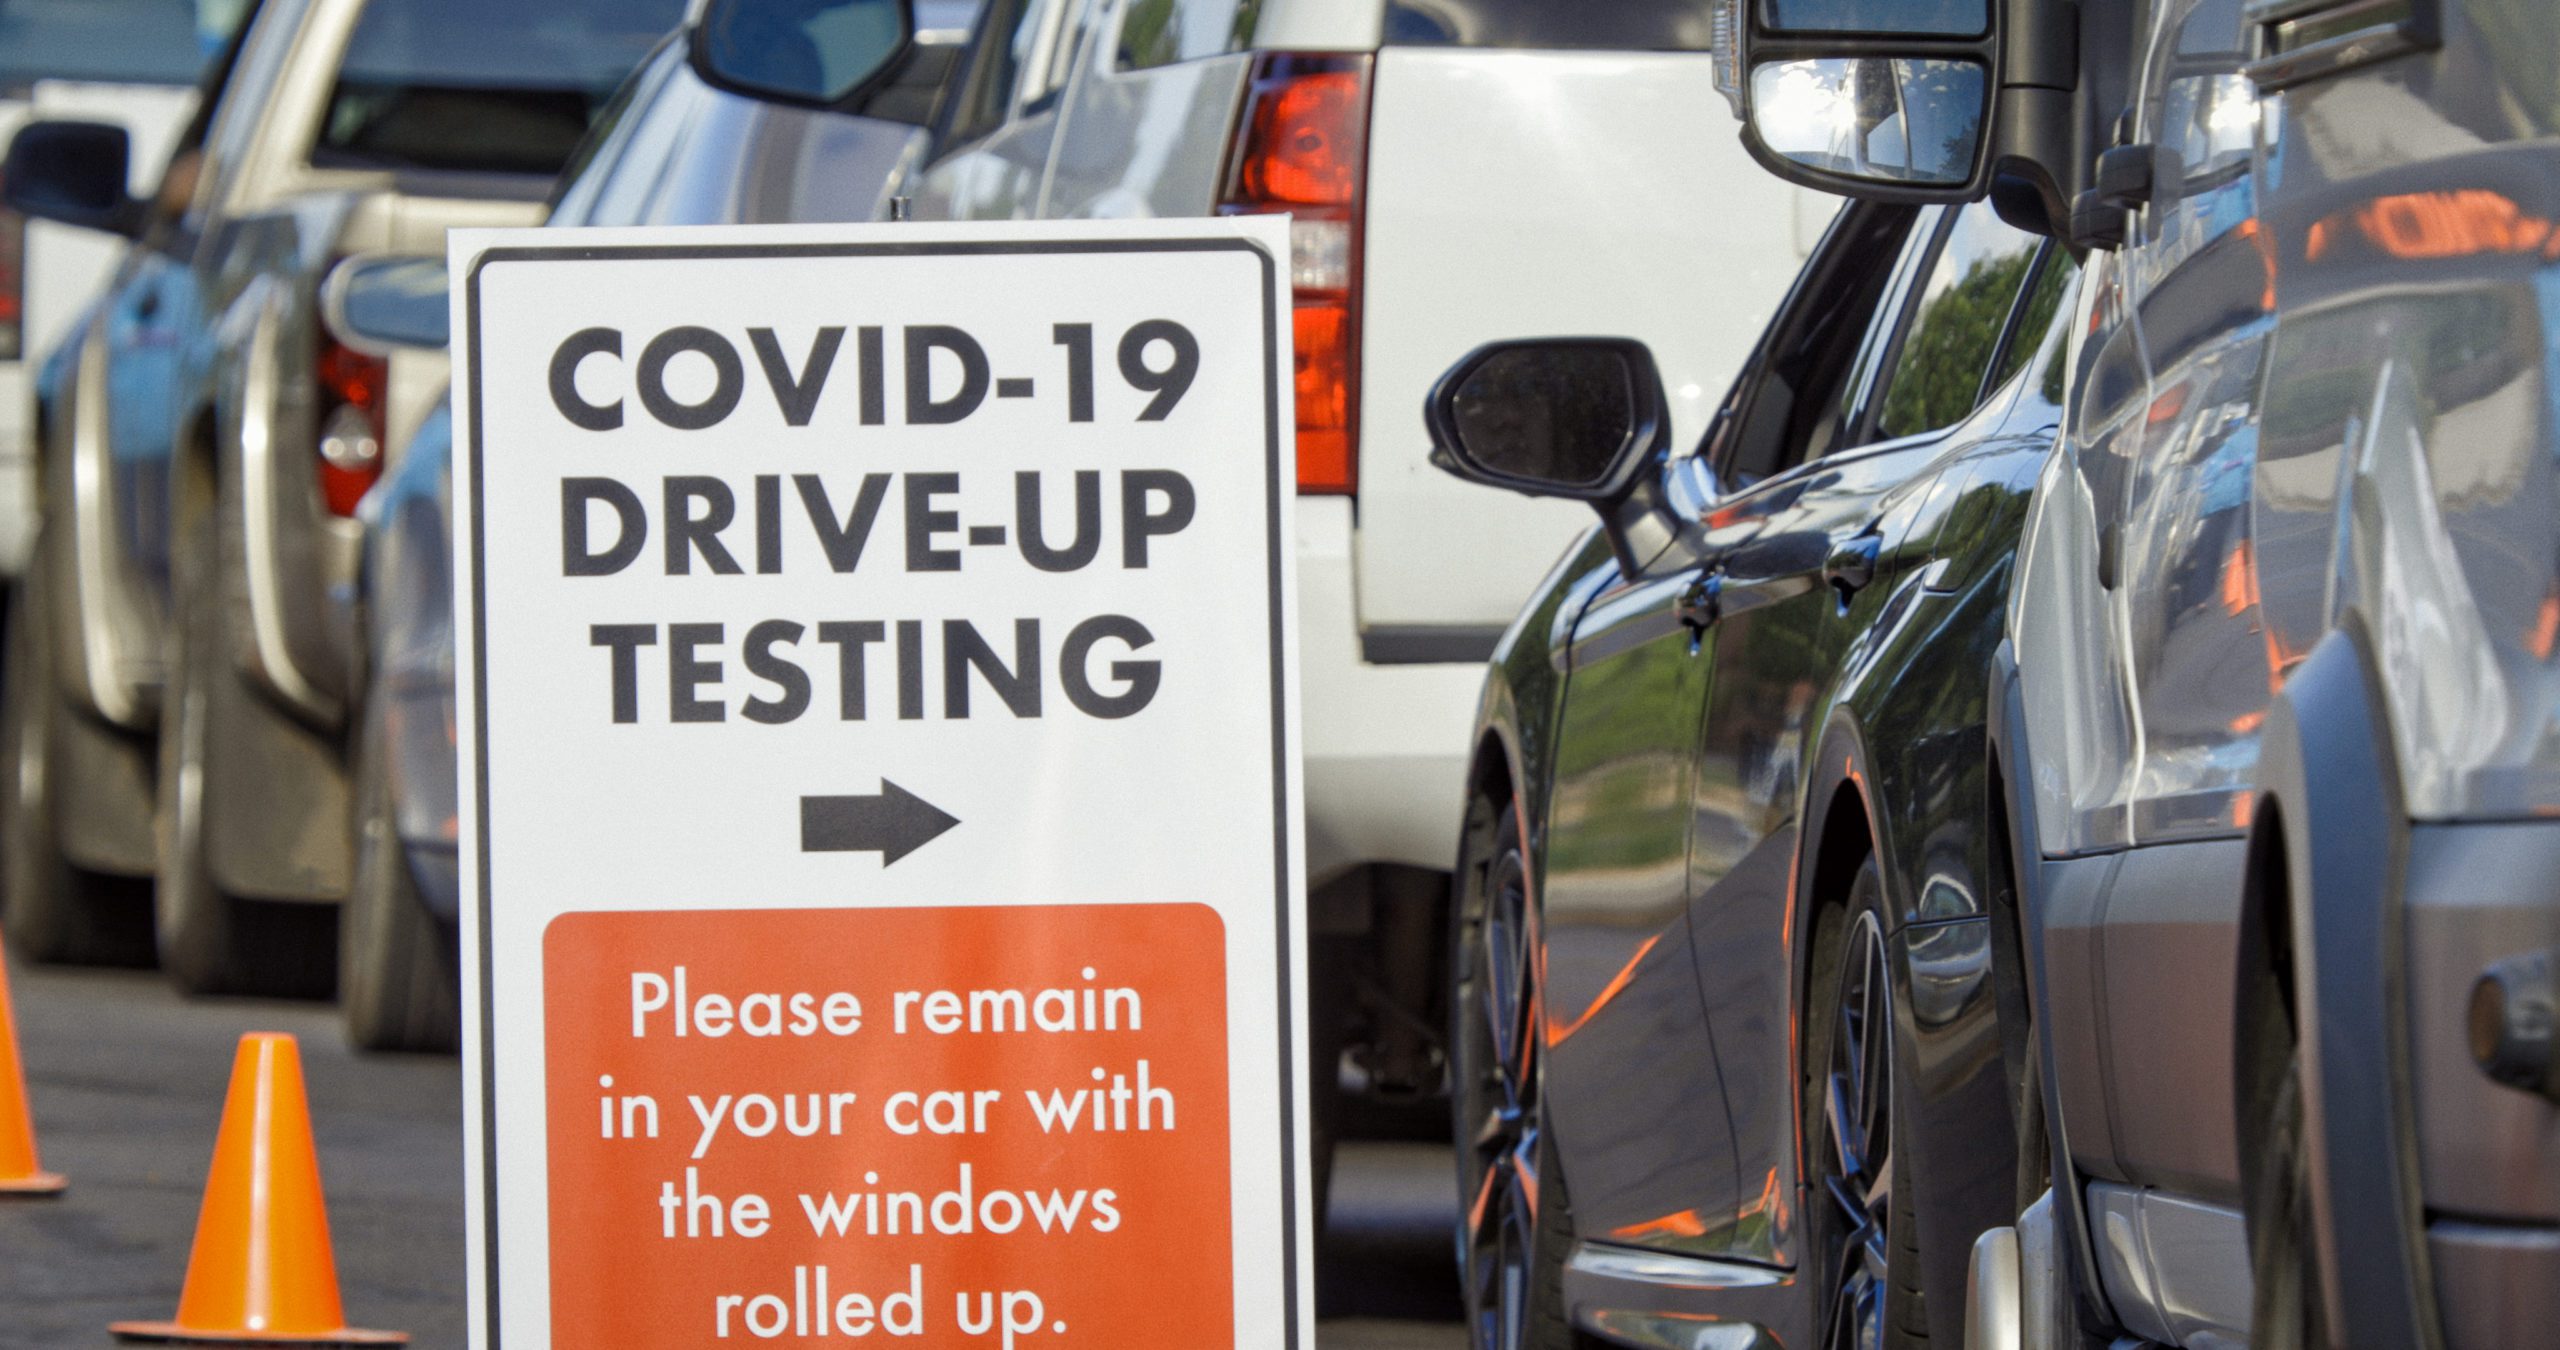 A "COVID-19 Drive-Up Testing" Sign Sits in the Foreground While Cars and Other Vehicles Wait in a Drive-Up (Drive Through) COVID-19 (Coronavirus) Testing Line Outside a Medical Clinic/Hospital Outdoors (Second Wave) in the Background